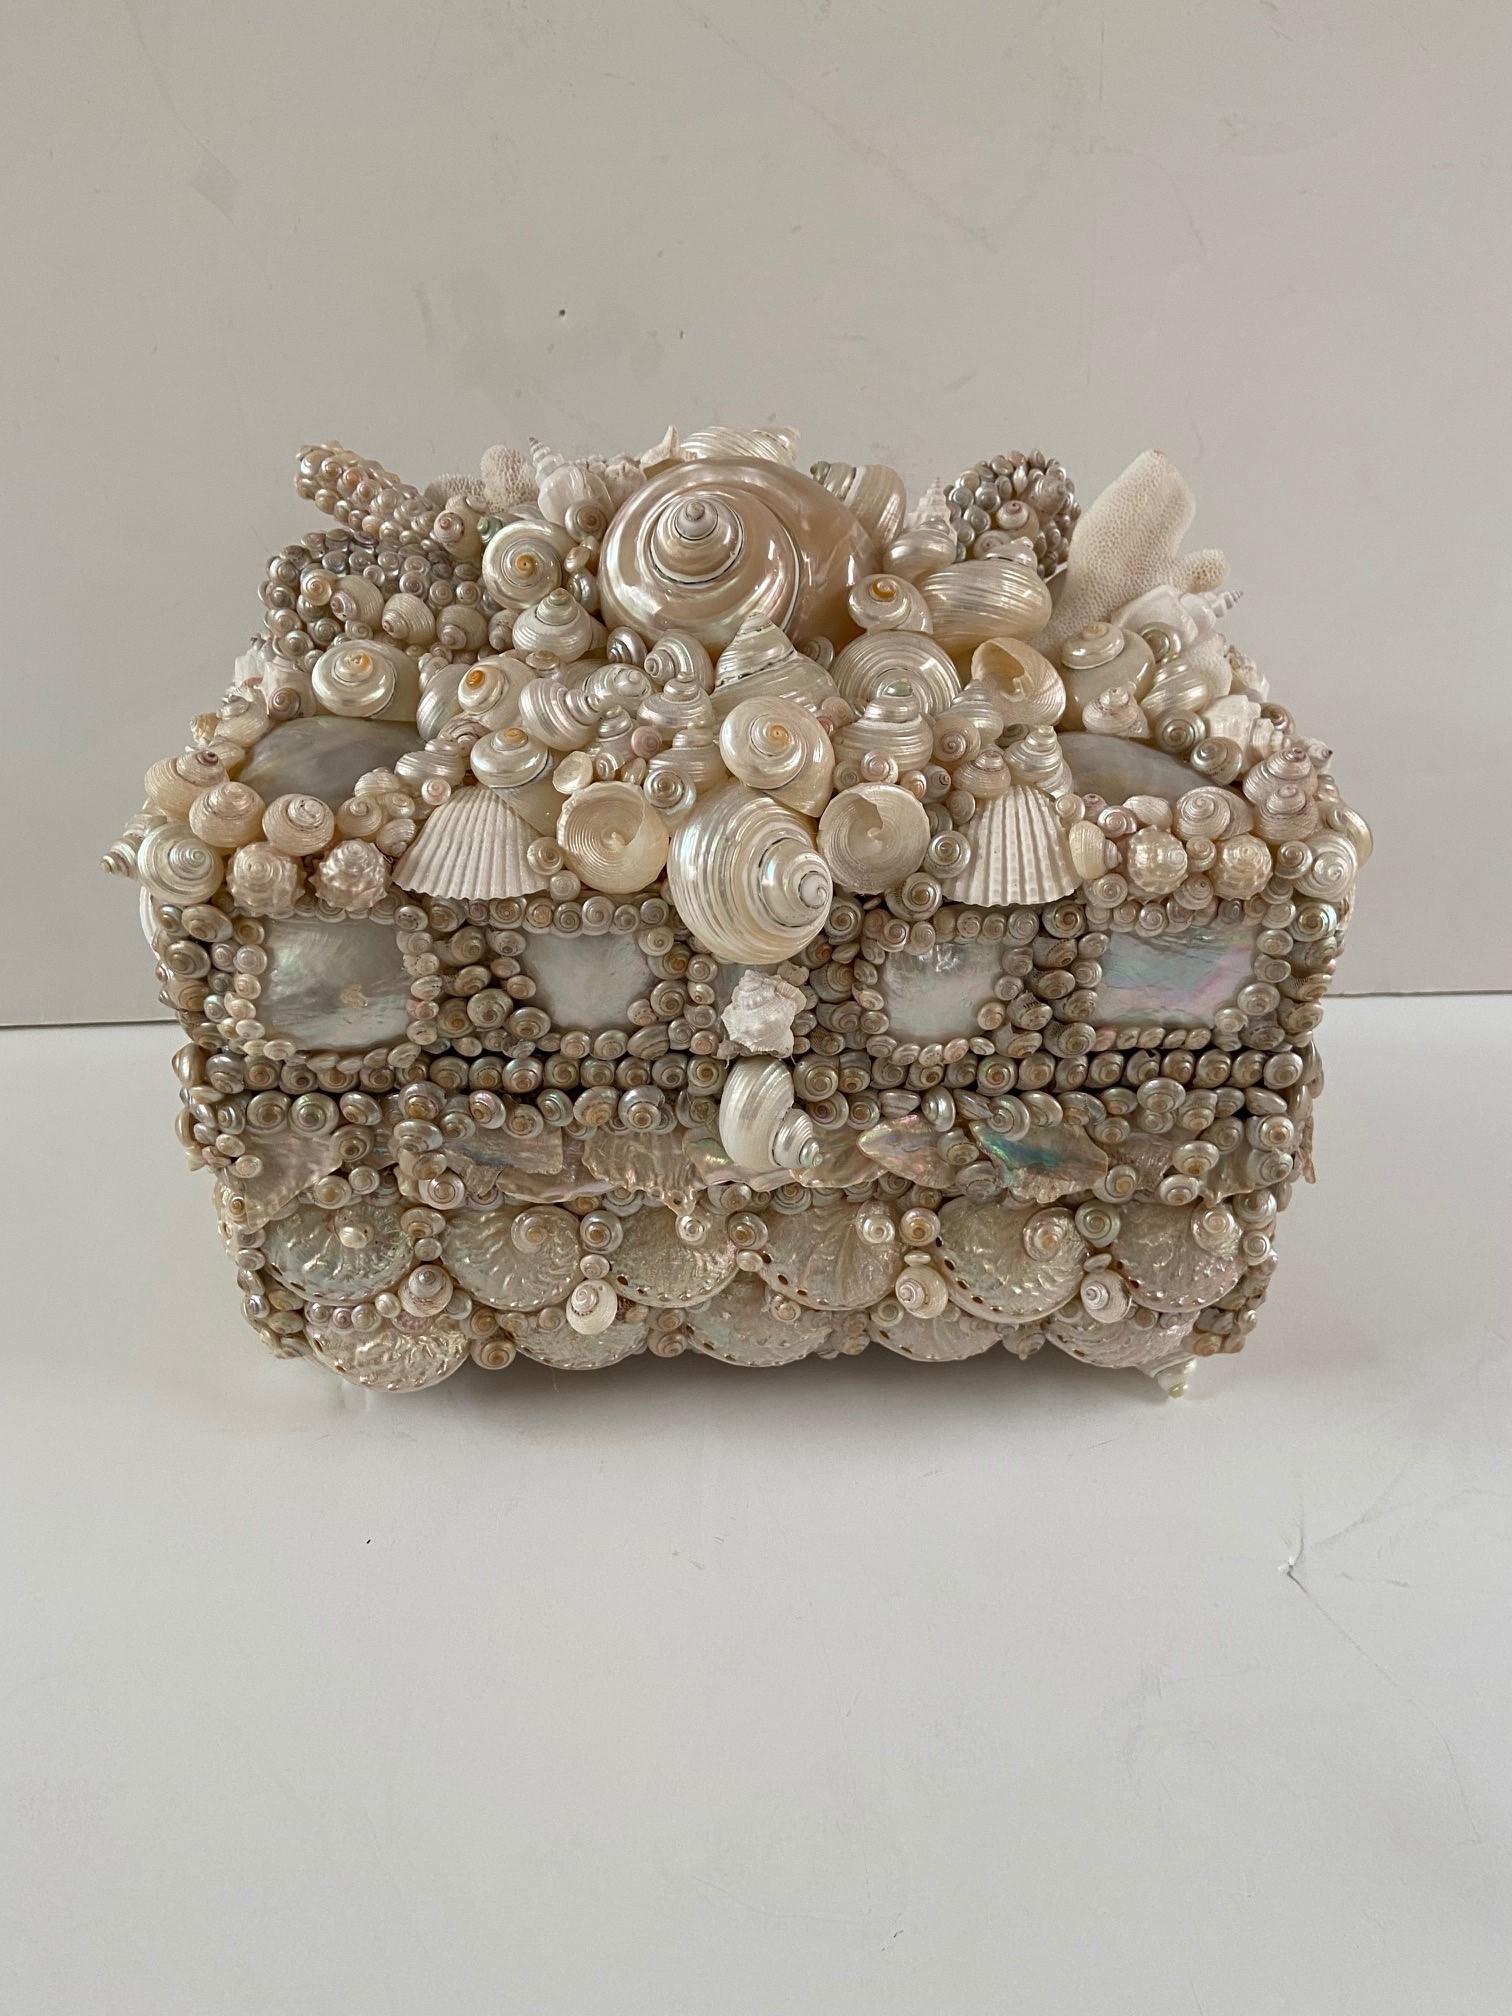 Beautiful handmade shell encrusted box with painted interior, the box could be used for jewelry or
just as ornamentation.